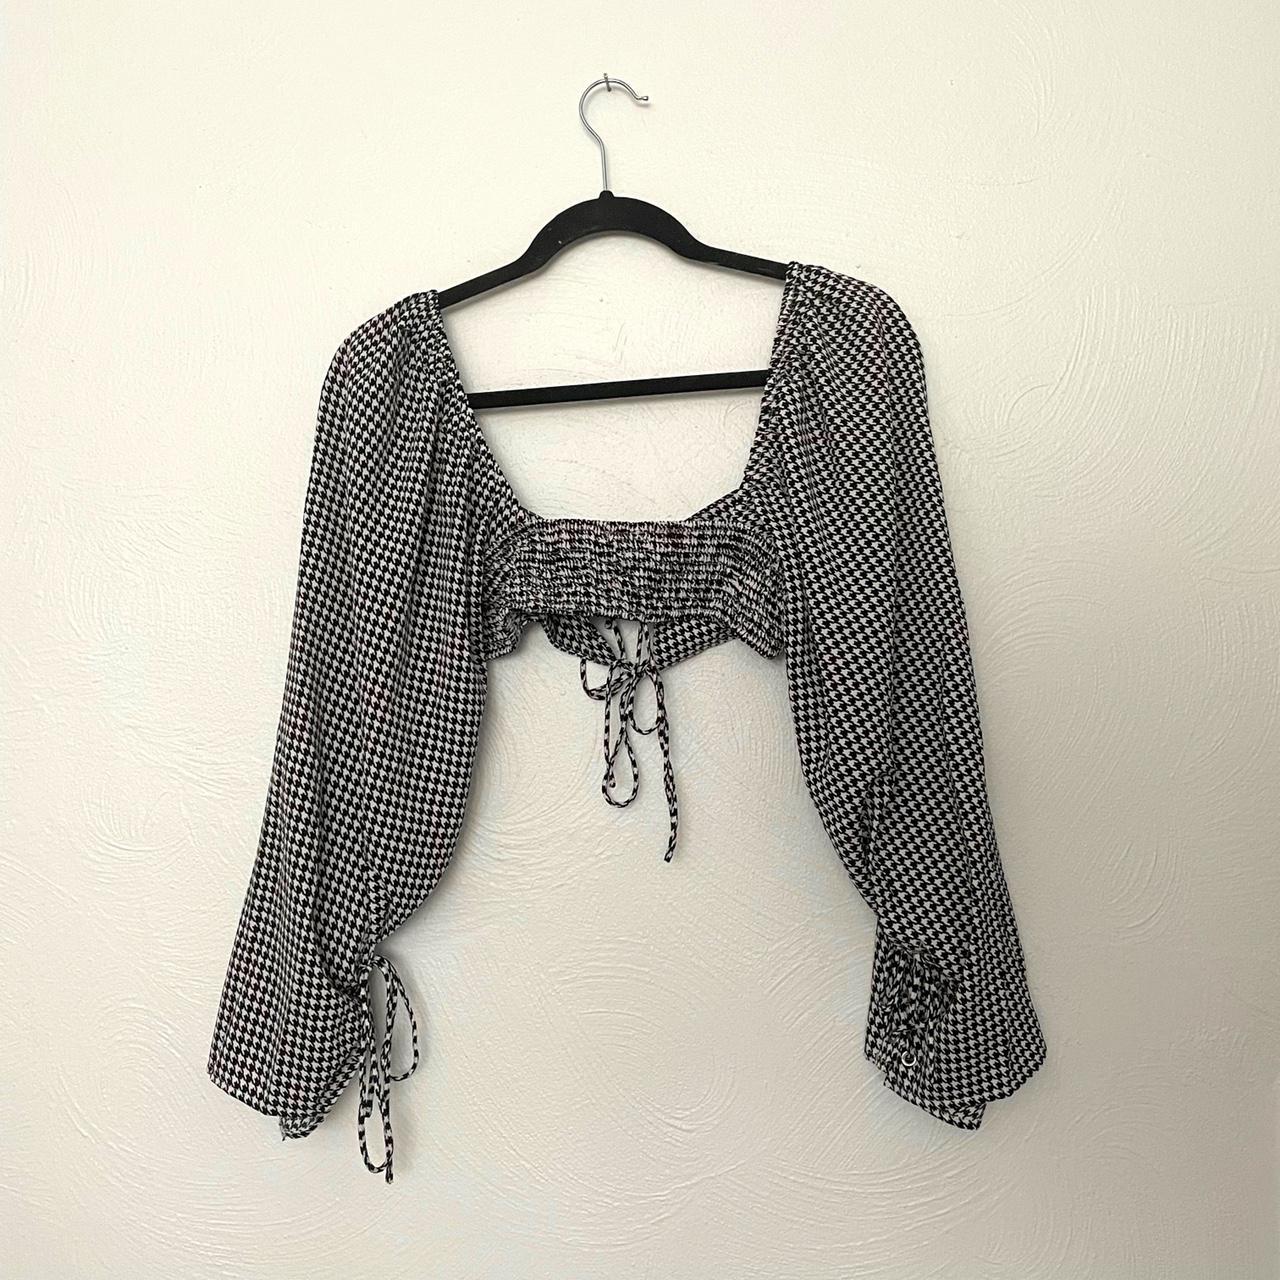 Product Image 3 - Houndstooth crop top!

from Verge Girl

adjustable